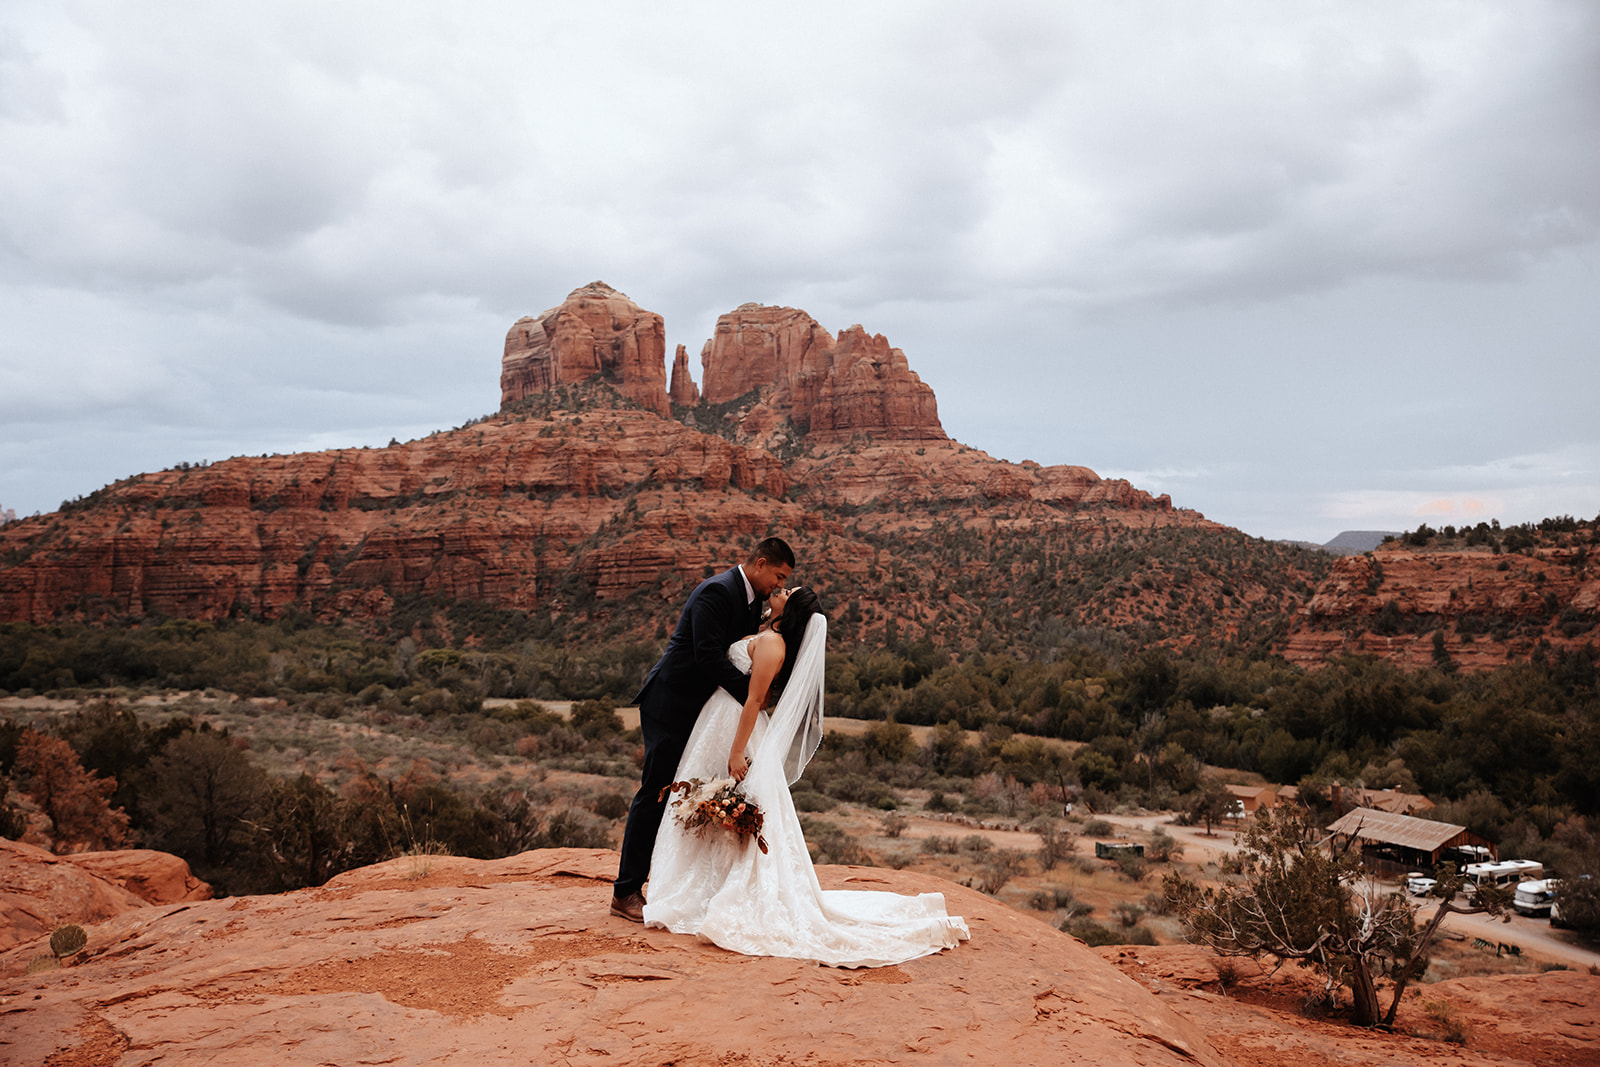 A couple who eloped in sedona kiss in front of red rocks